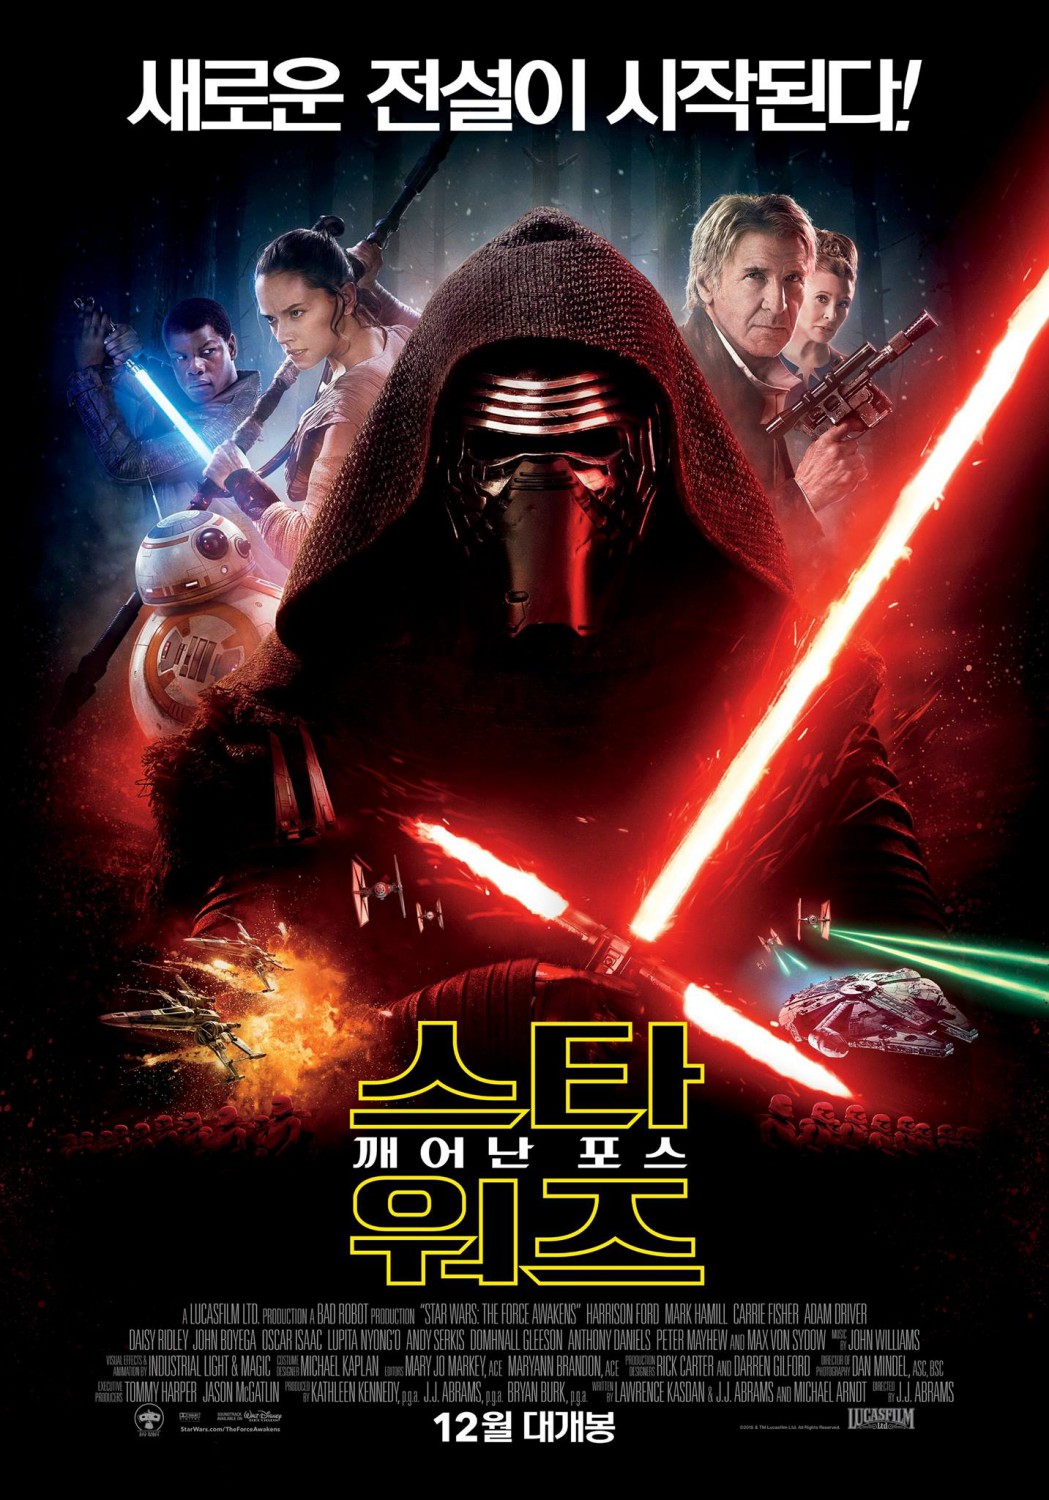 Extra Large Movie Poster Image for Star Wars: The Force Awakens (#11 of 29)